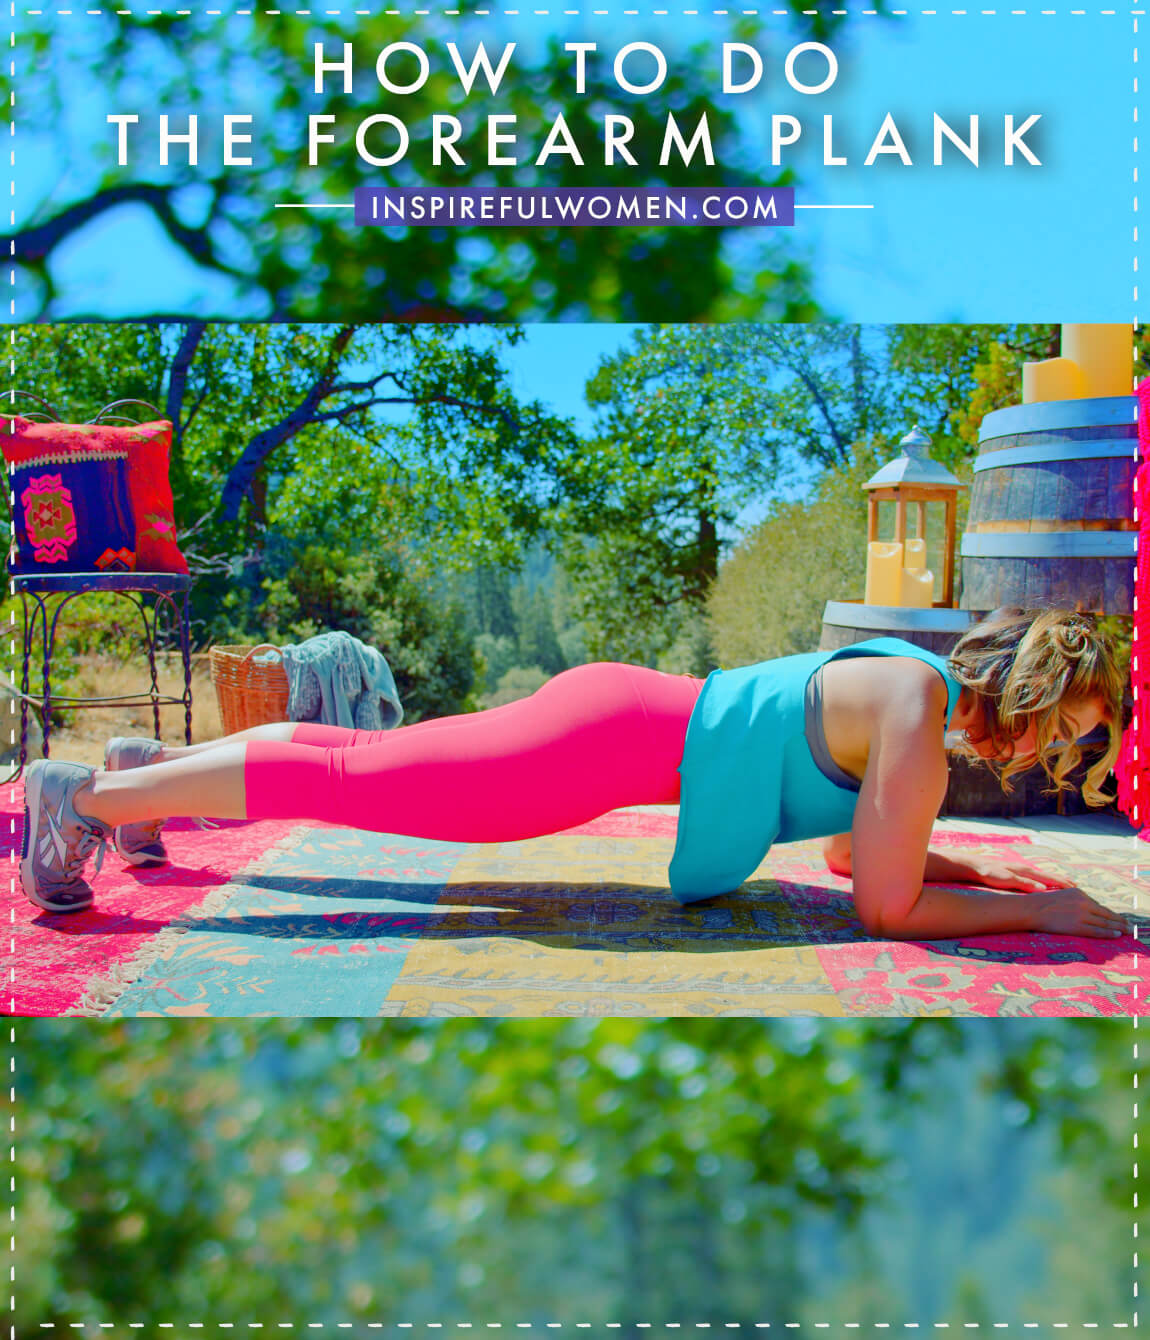 how-to-forearm-plank-beginner-variation-no-weight-ab-core-strength-exercise-proper-form